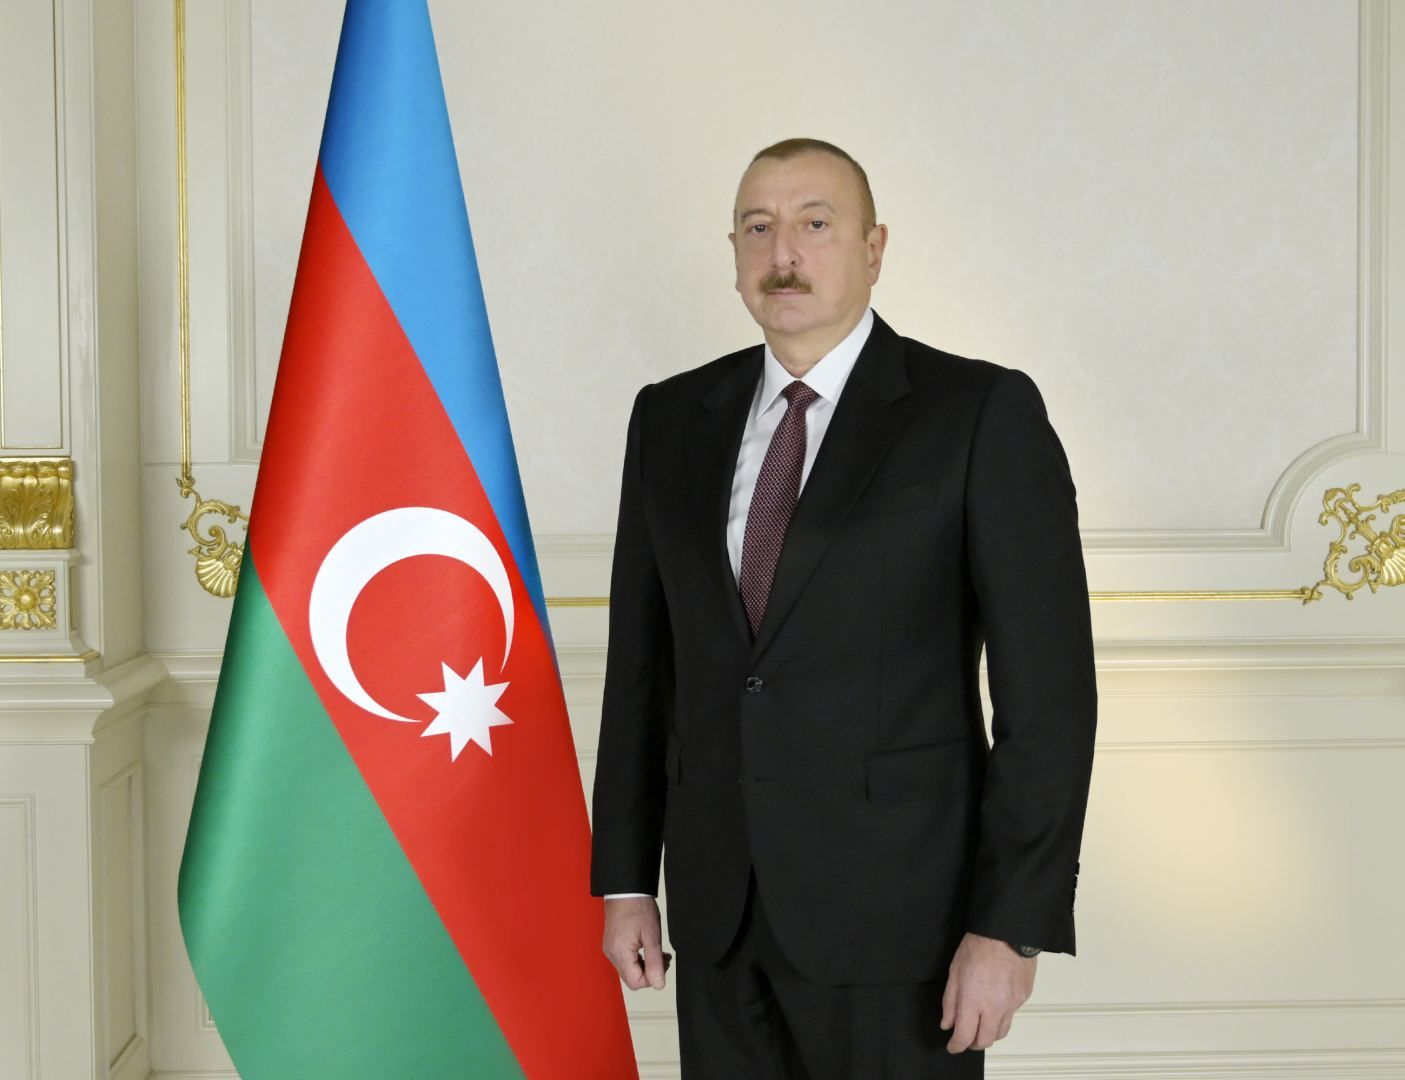 President Ilham Aliyev appoints new head of Samukh District Executive Power